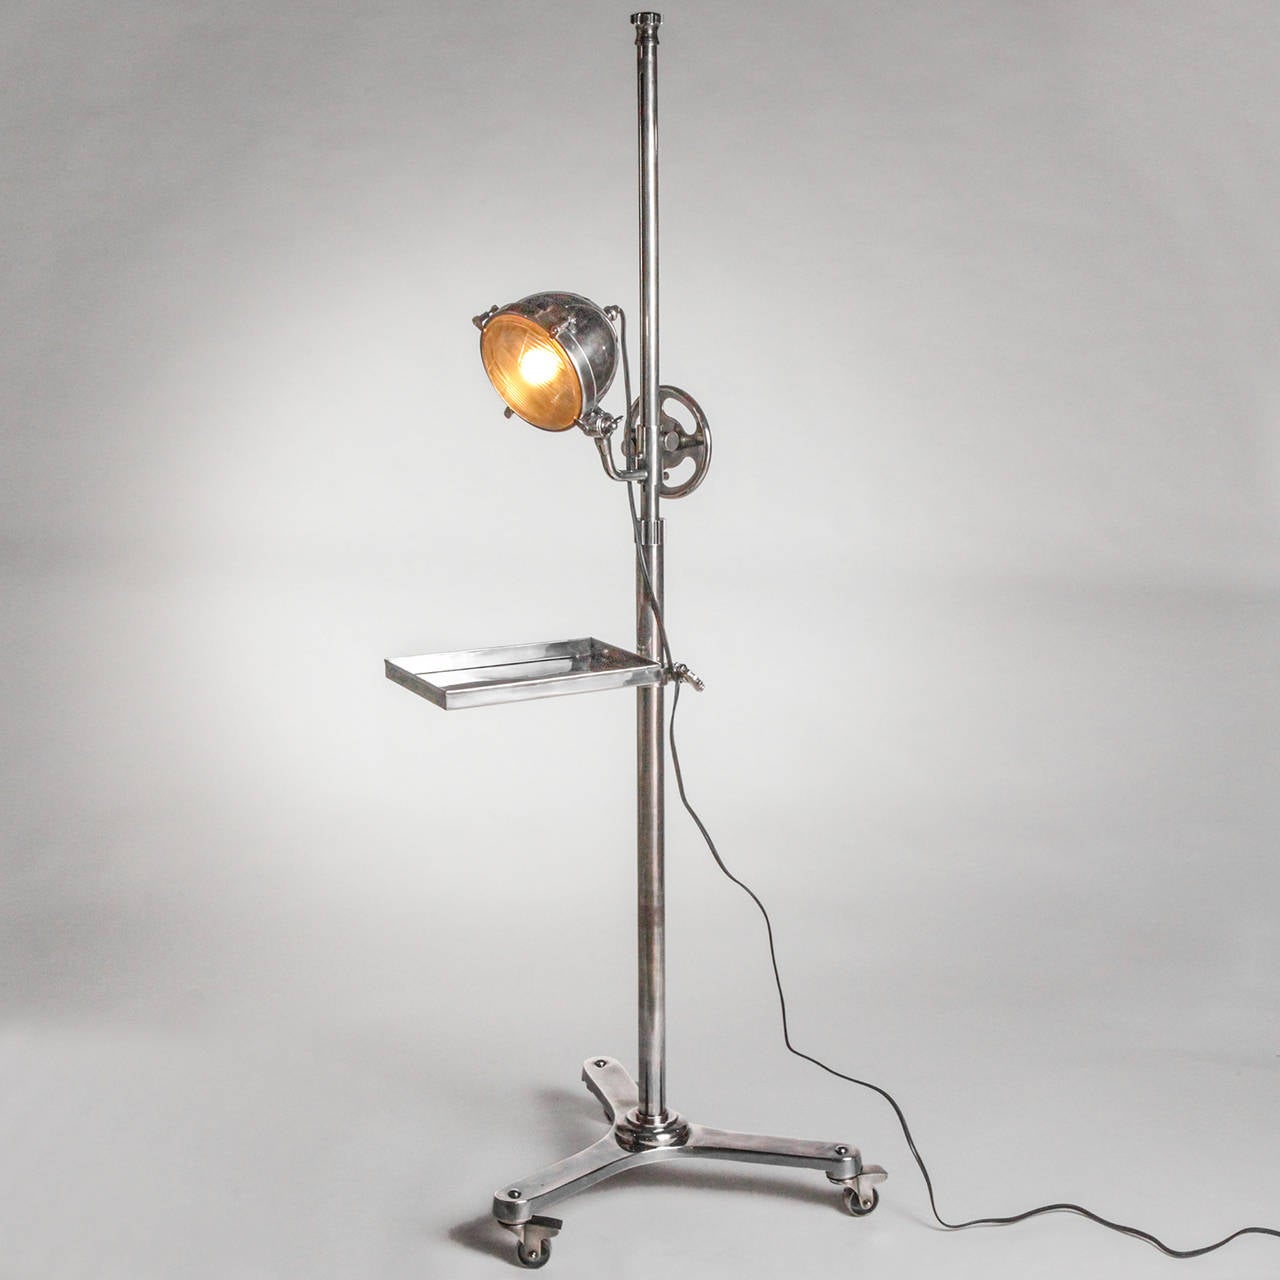 Unique standing adjustable lamp with small rectangular side tray on a tripod base with wheels. Limited edition; one available.